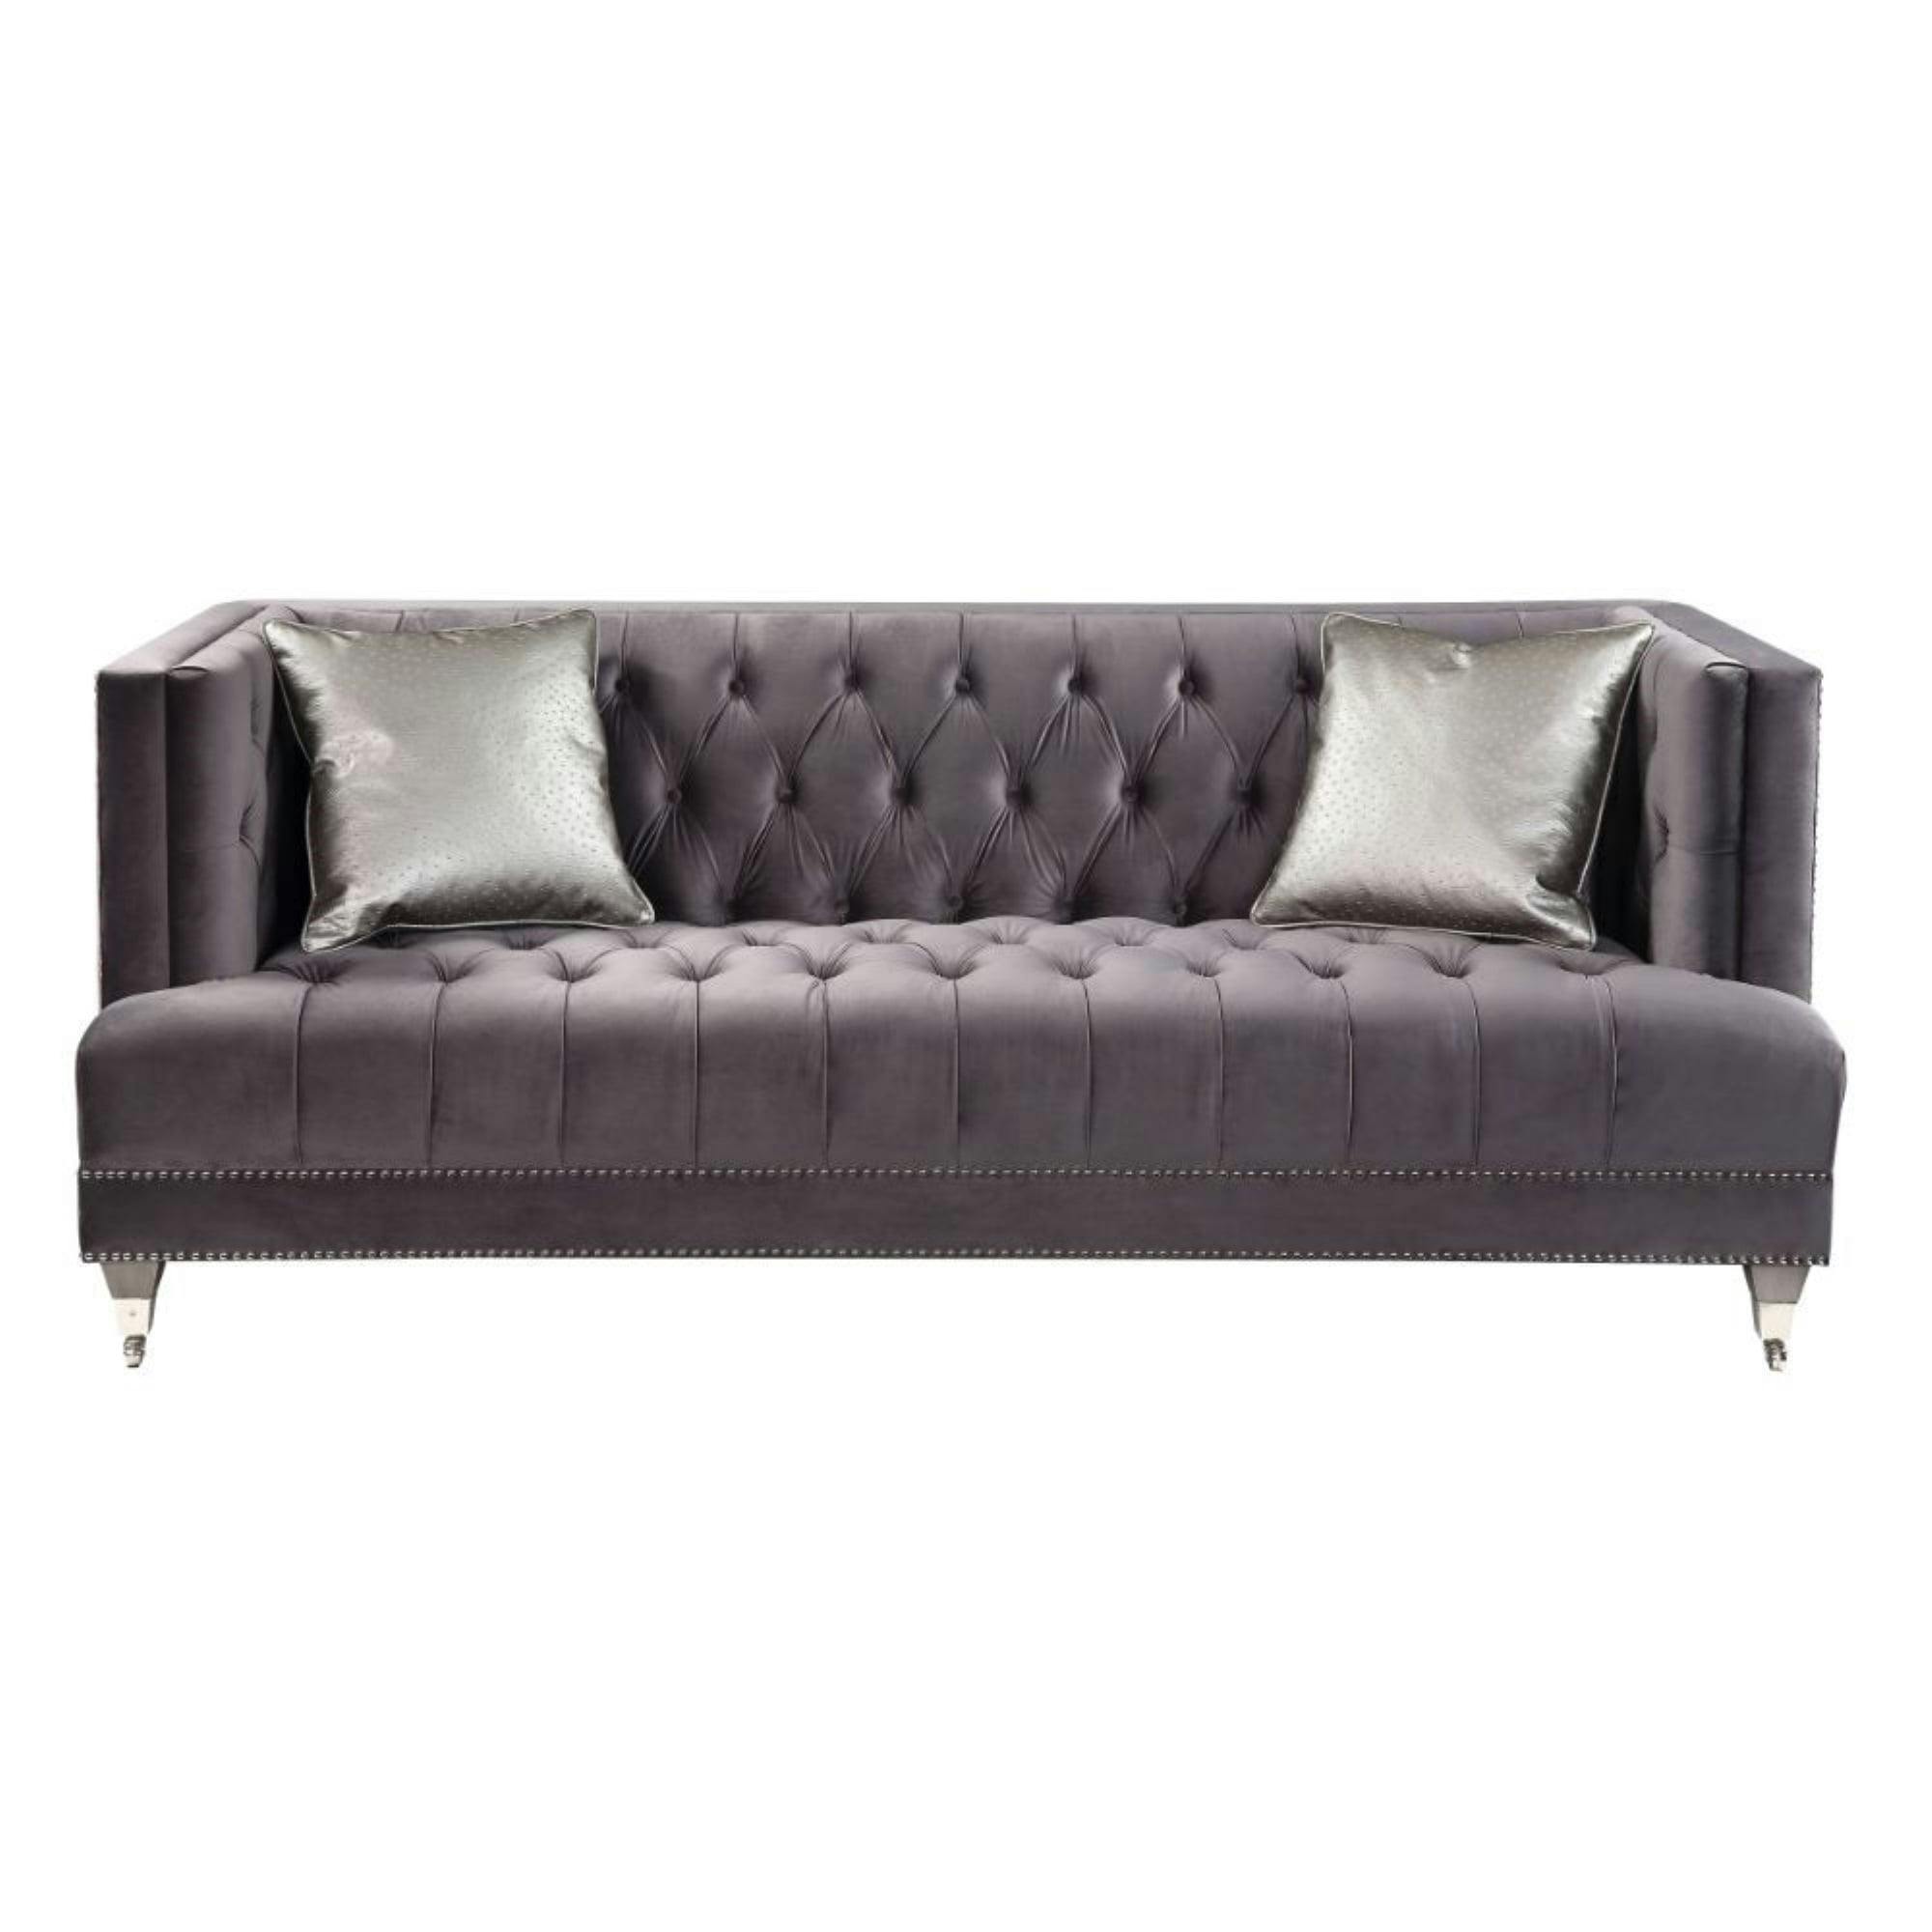 Chic Gray Velvet Chesterfield Sofa with Nailhead Trim and Tufted Accents